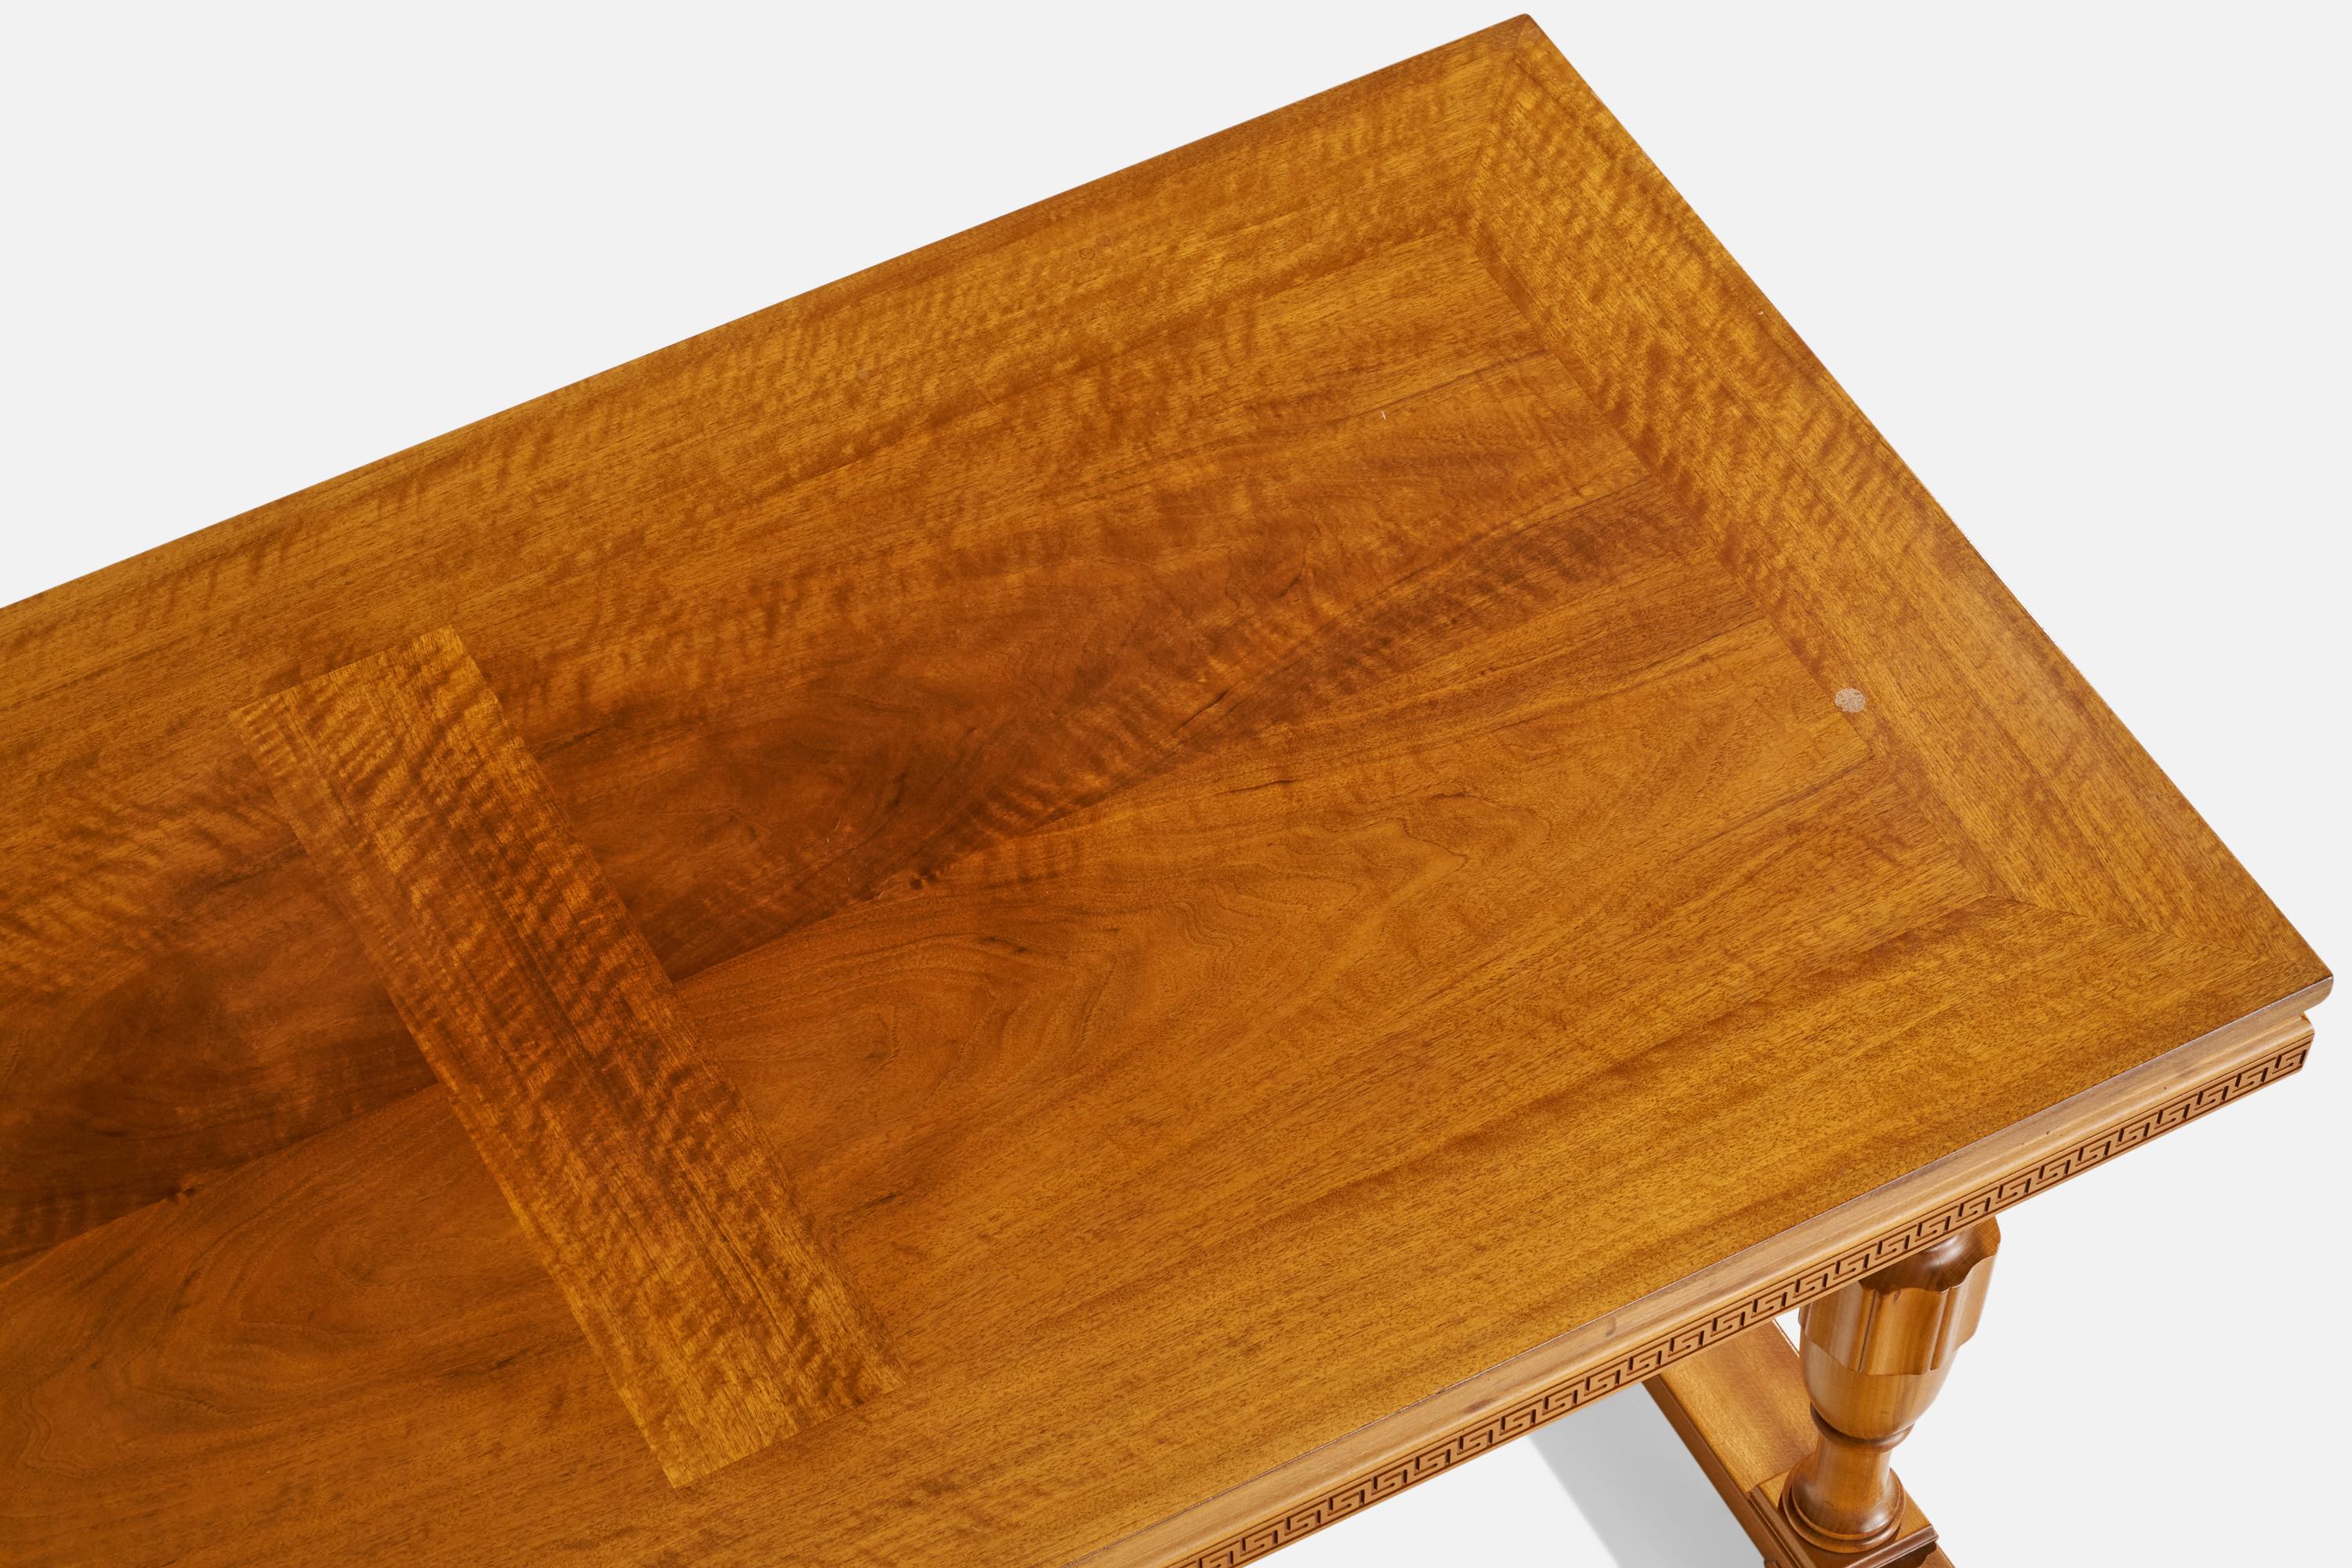 A wood coffee table designed and produced in Sweden, c. 1930s.